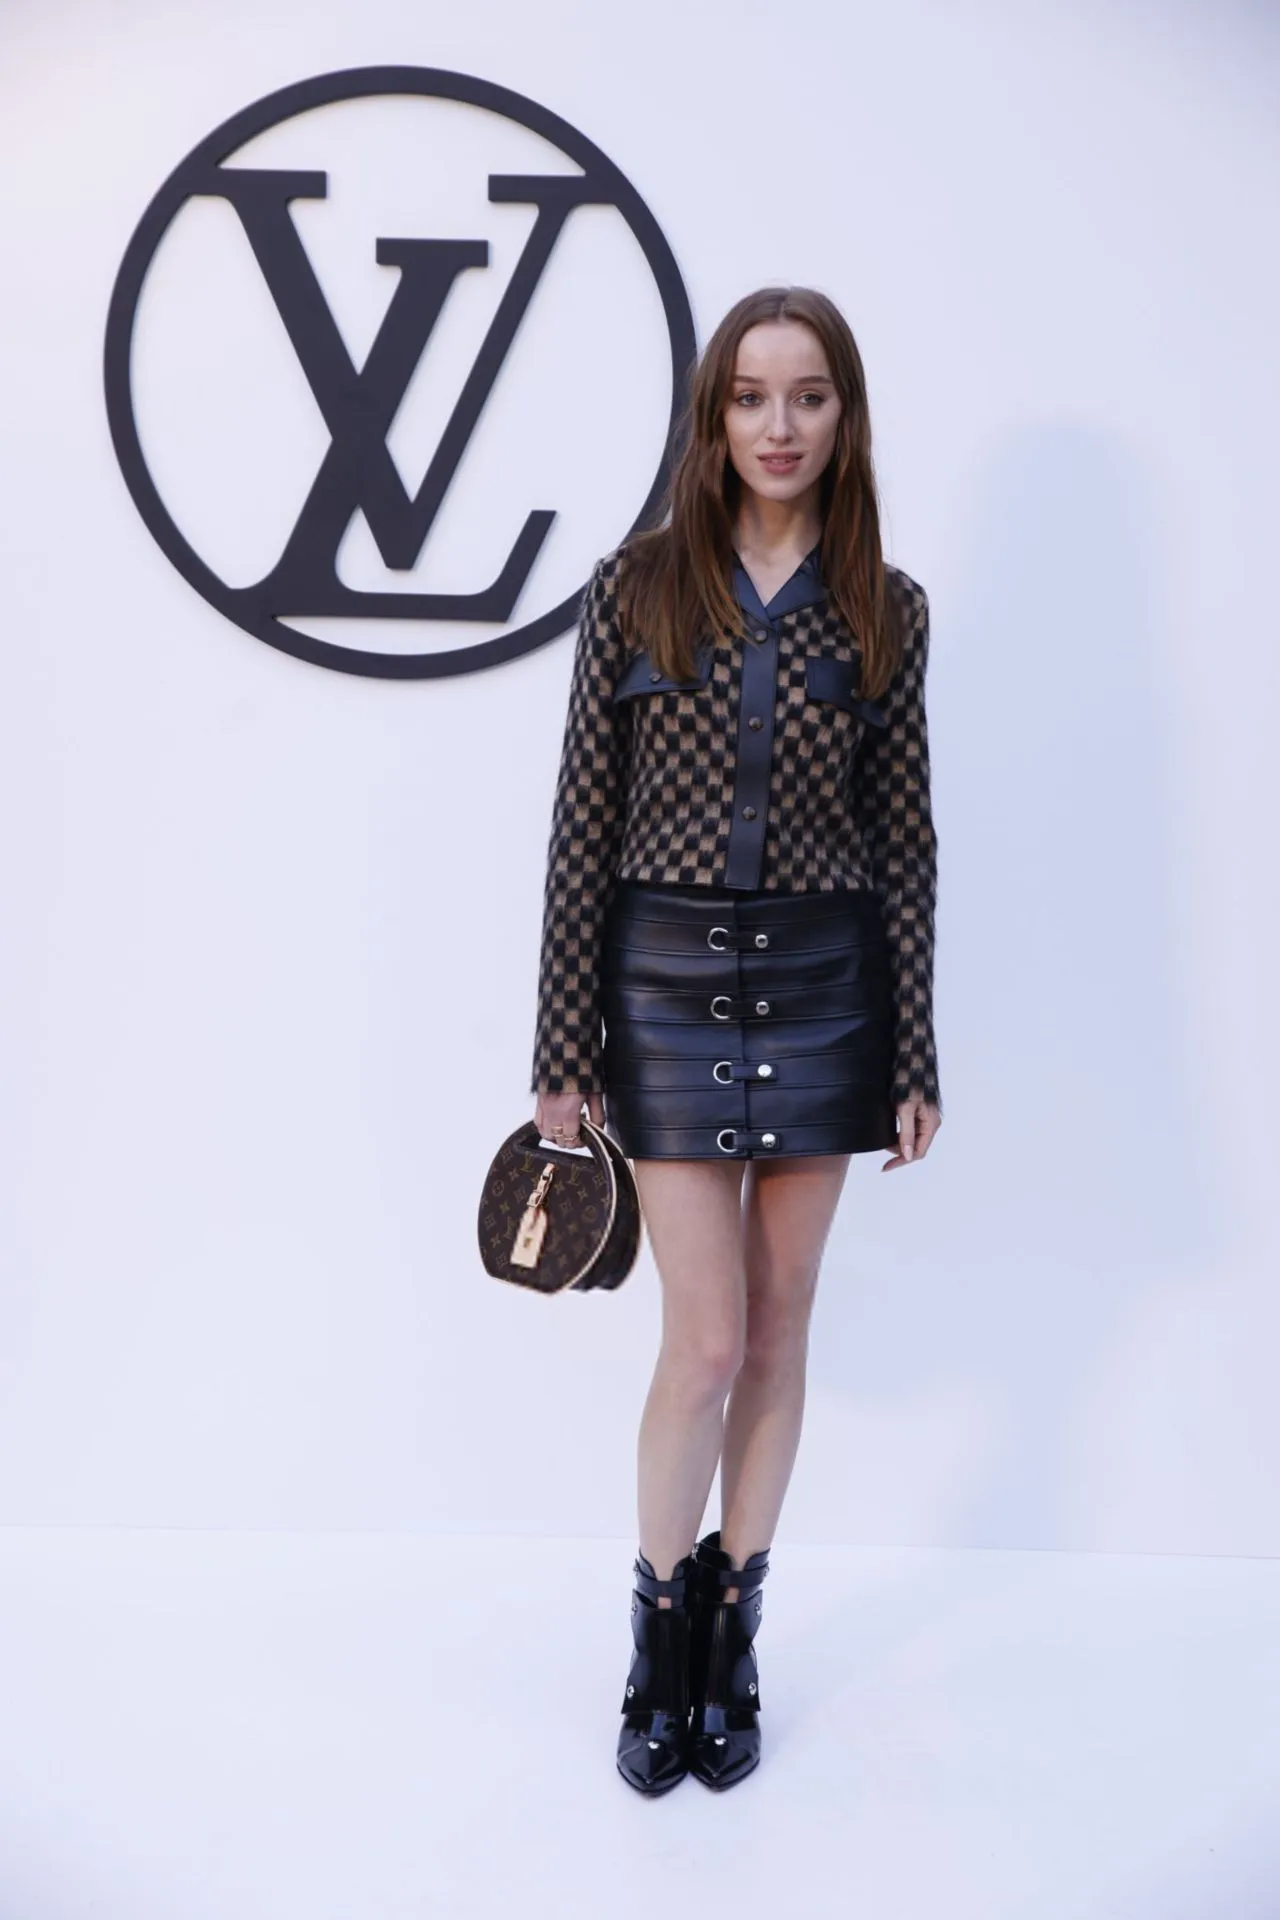 PHOEBE DYNEVOR AT LOUIS VUITTON PHOTOCALL FASHION SHOW IN BARCELONA1